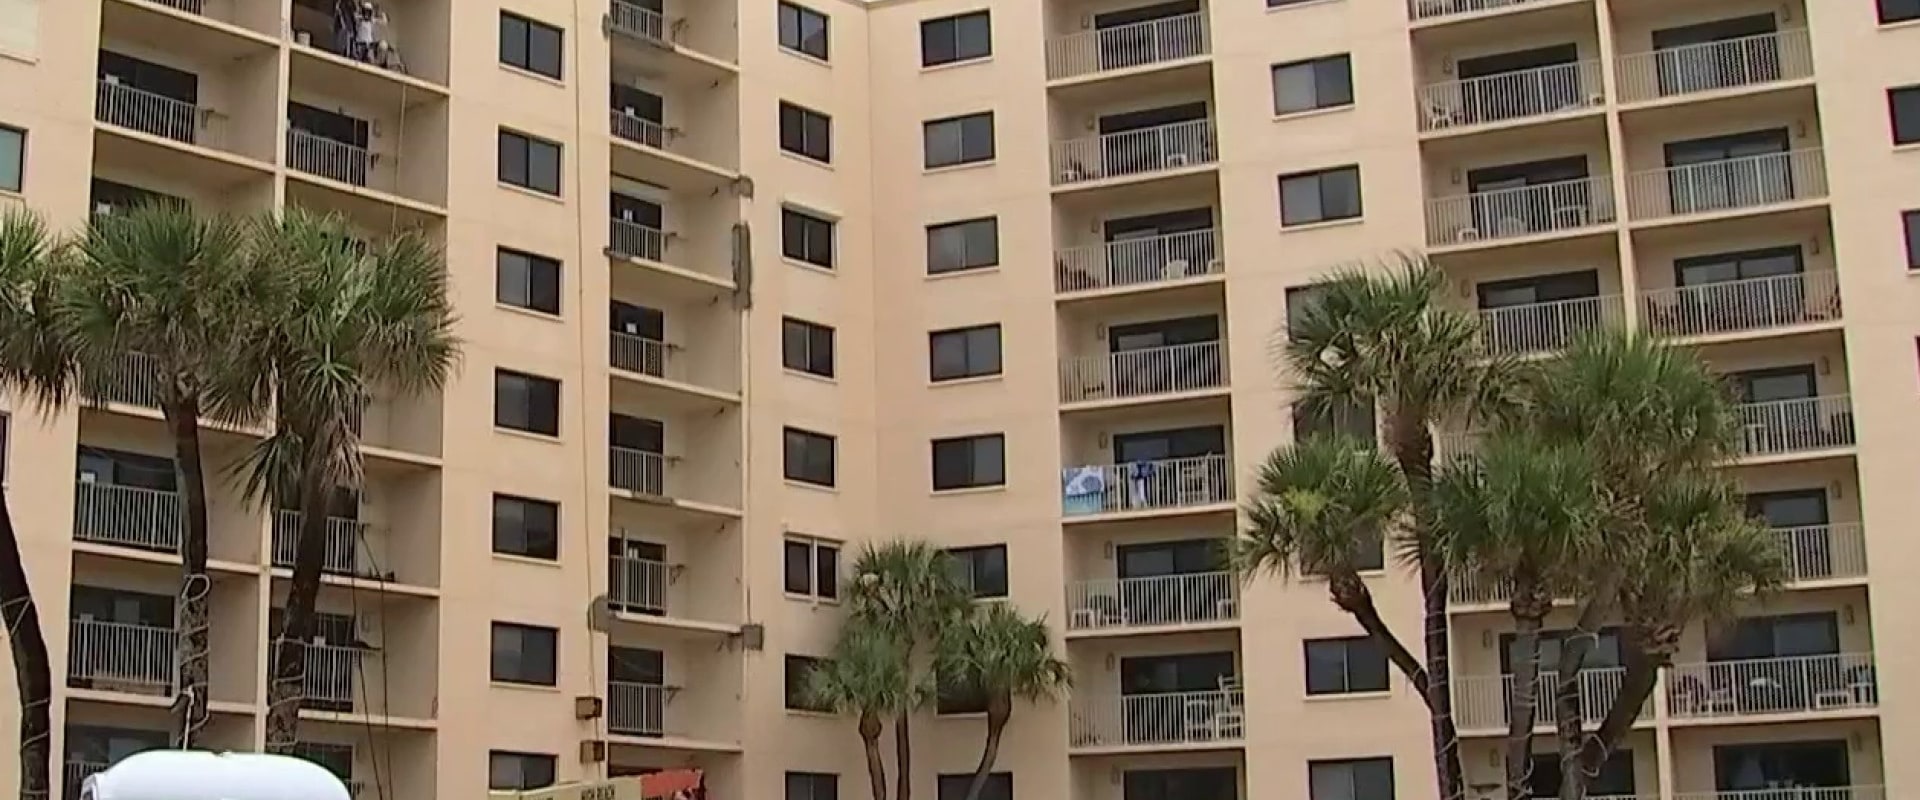 How Often Should Condos in Florida Be Inspected?